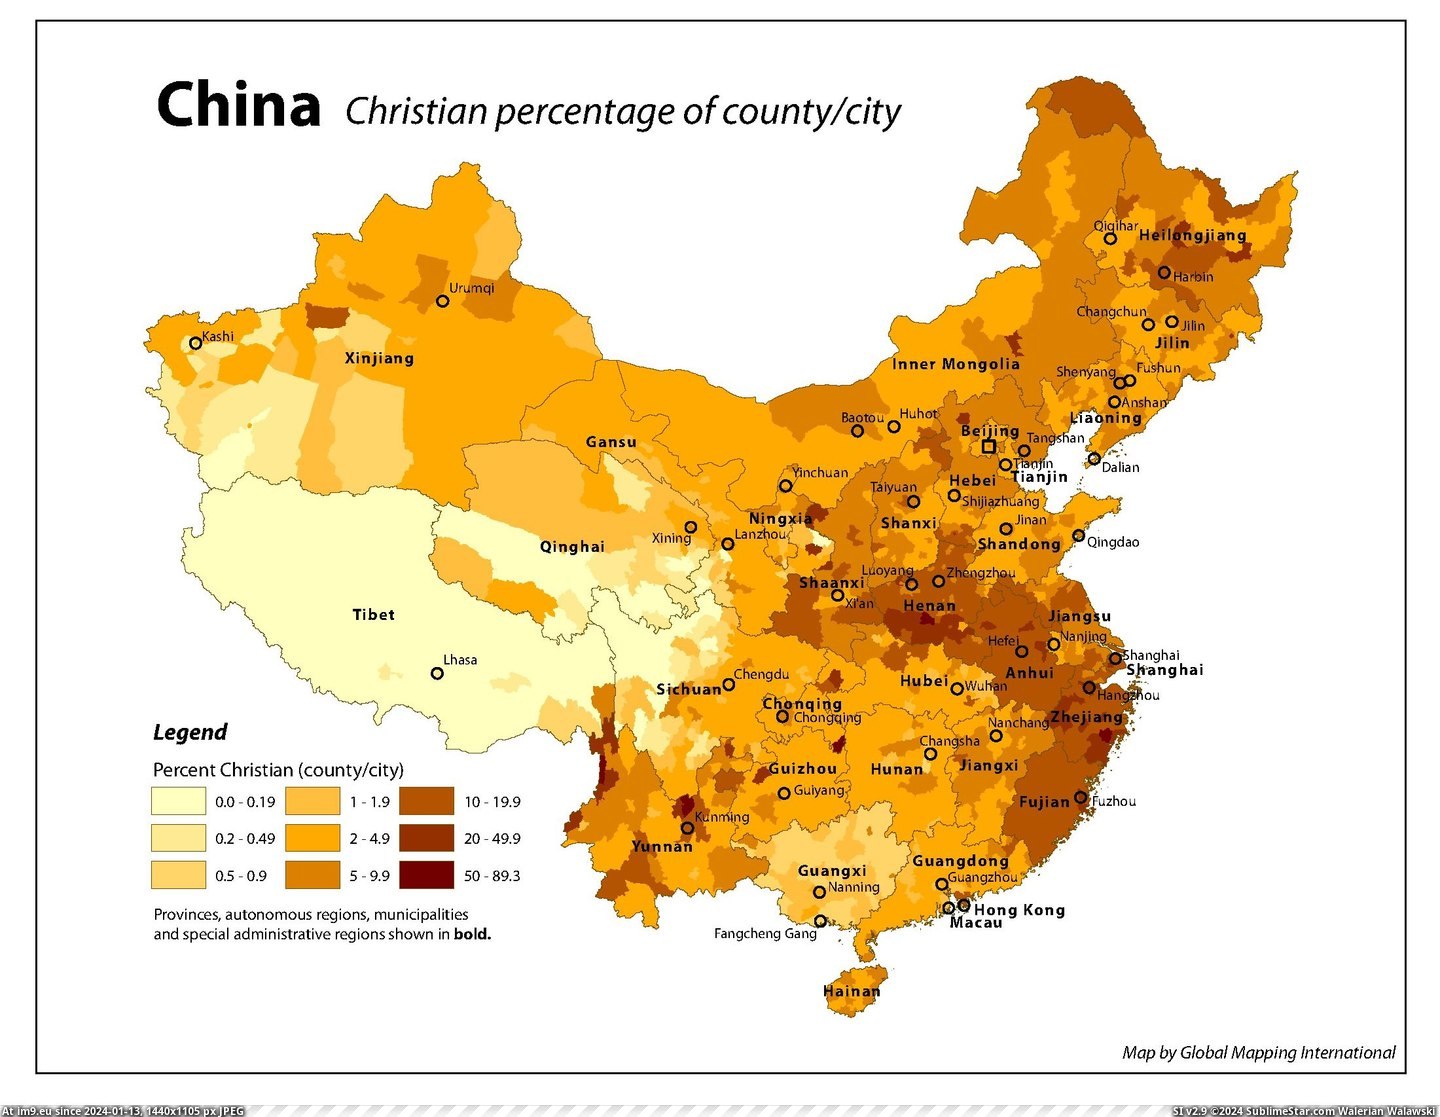 #Years #Chinese #Religion #China [Mapporn] China's Christians: Surveys on religion in China conducted in the years 2006, 2008, 2010 and 2011 by the Chinese Gener Pic. (Image of album My r/MAPS favs))